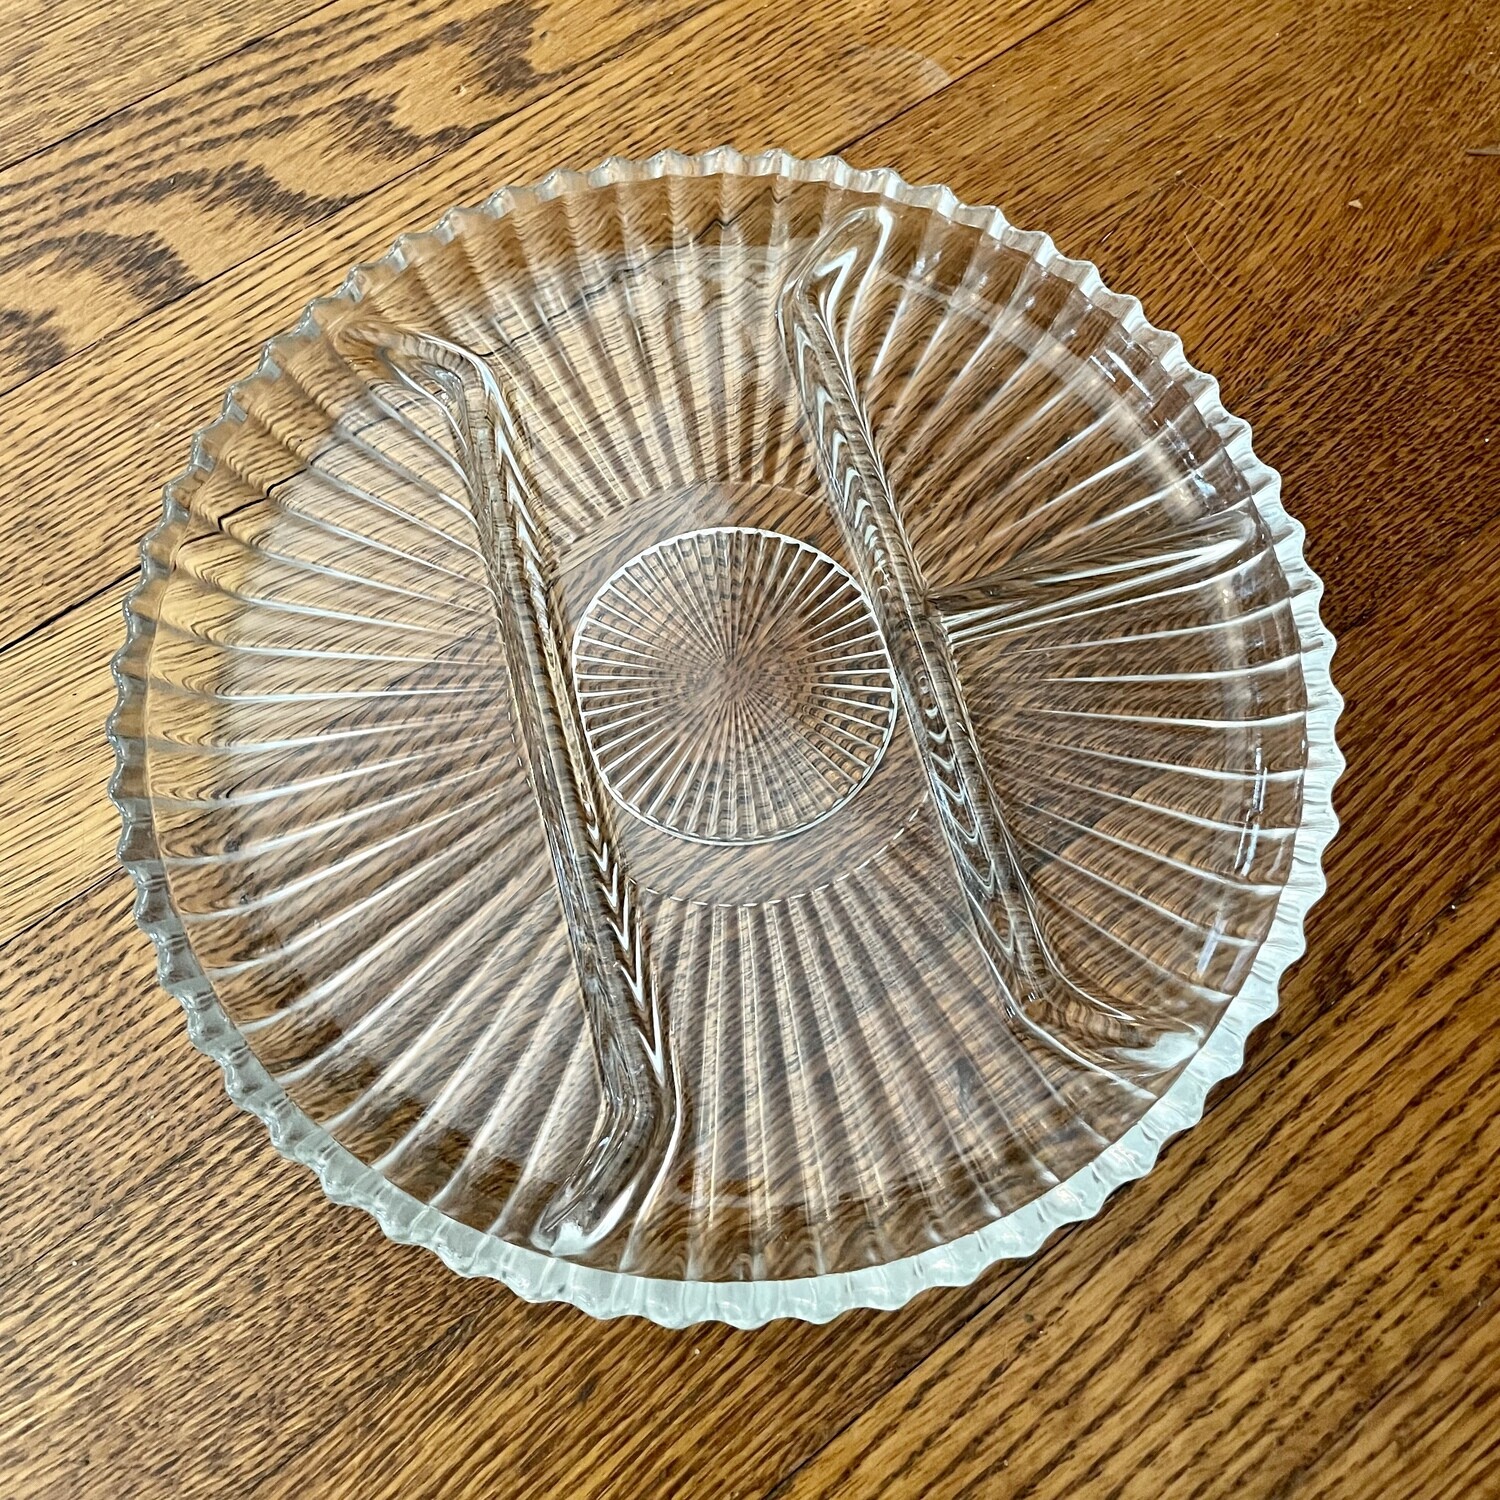 Indiana Glass Co. Crystal Happenings 4 Section Divided Serving Plate 10”